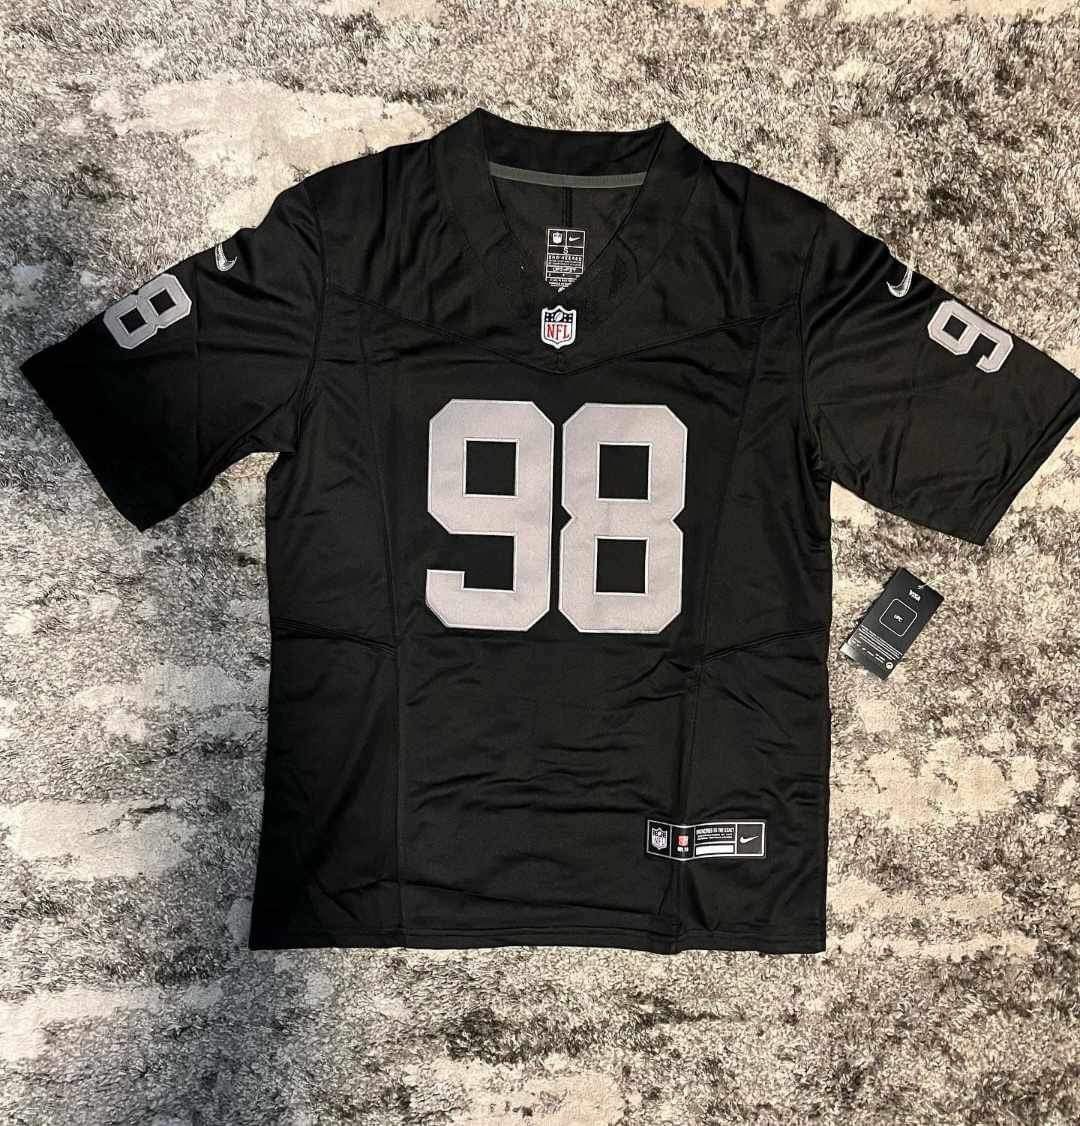 Raiders Black Jersey For Crosby New With Tags Available All Sizes 